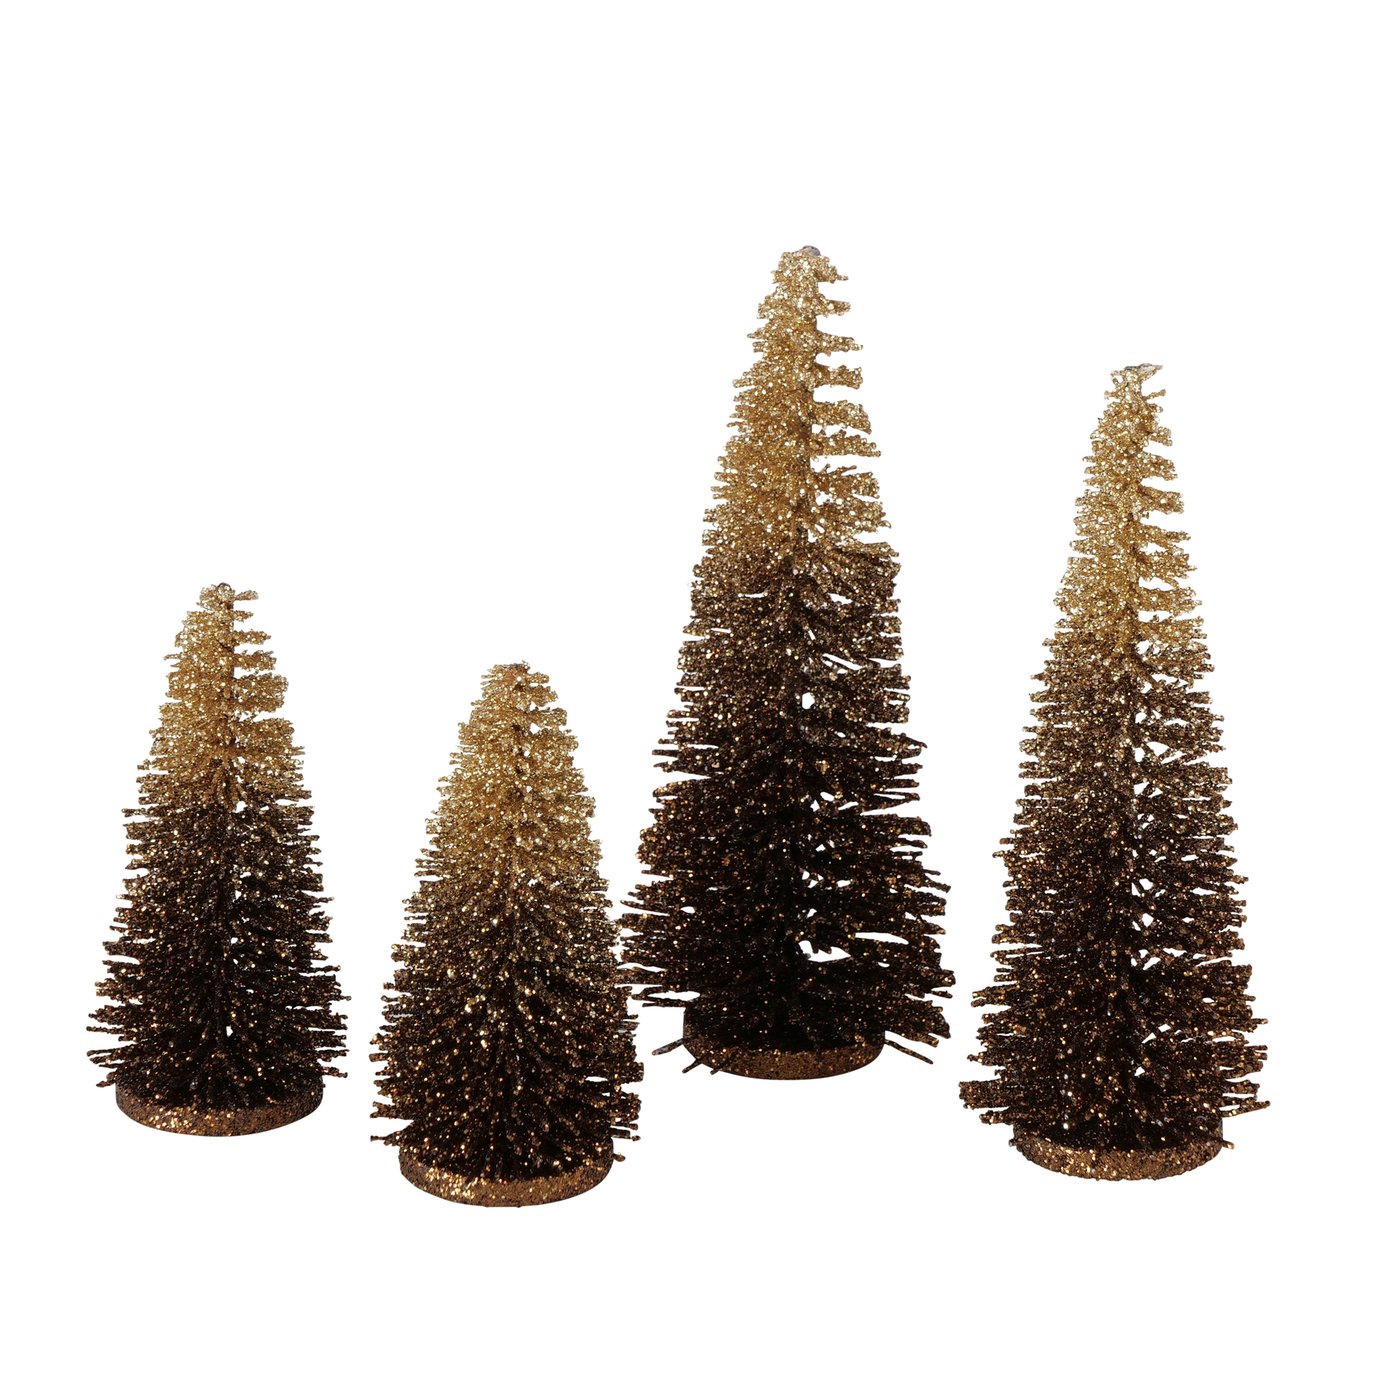 &Quirky Glam Black & Gold Bottle Brush Tree Decorations : Set of 4